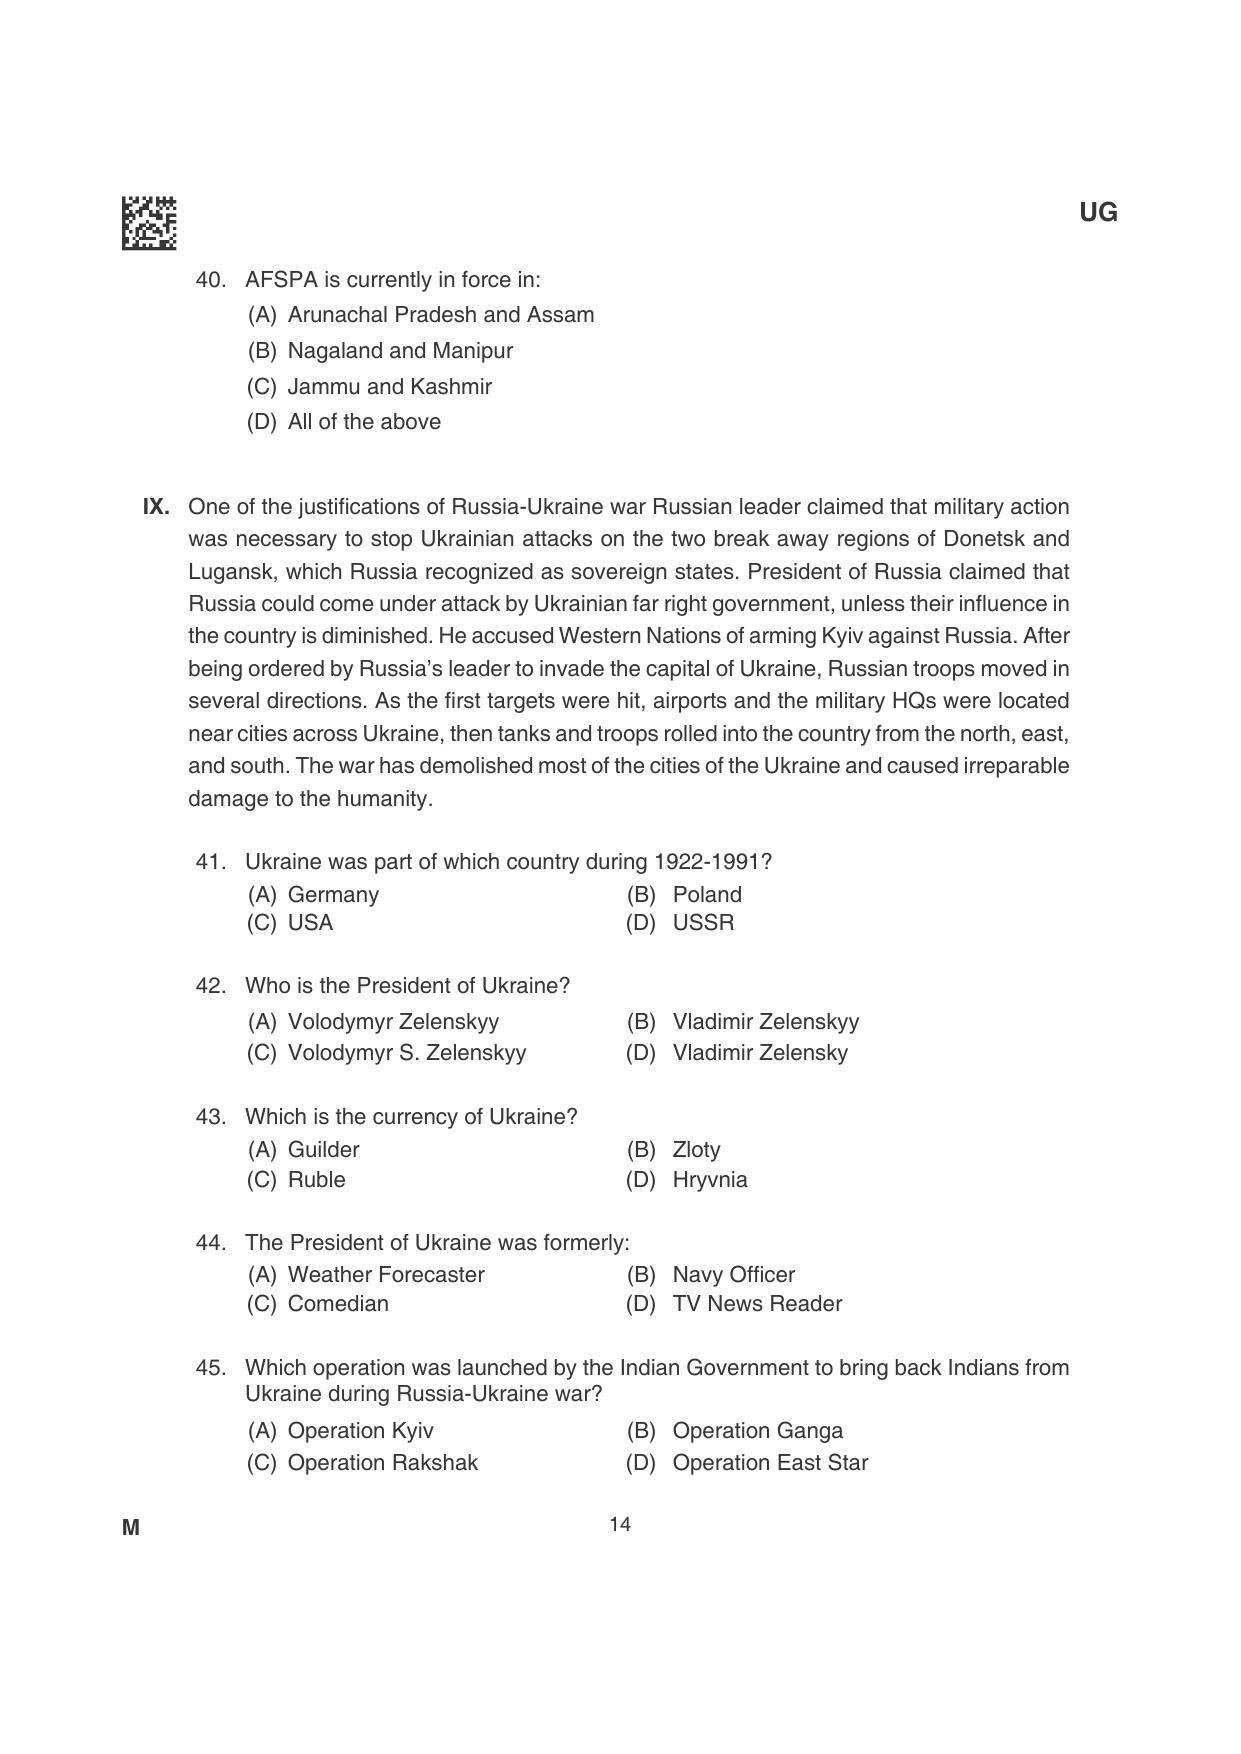 CLAT 2022 UG Question Papers - Page 14